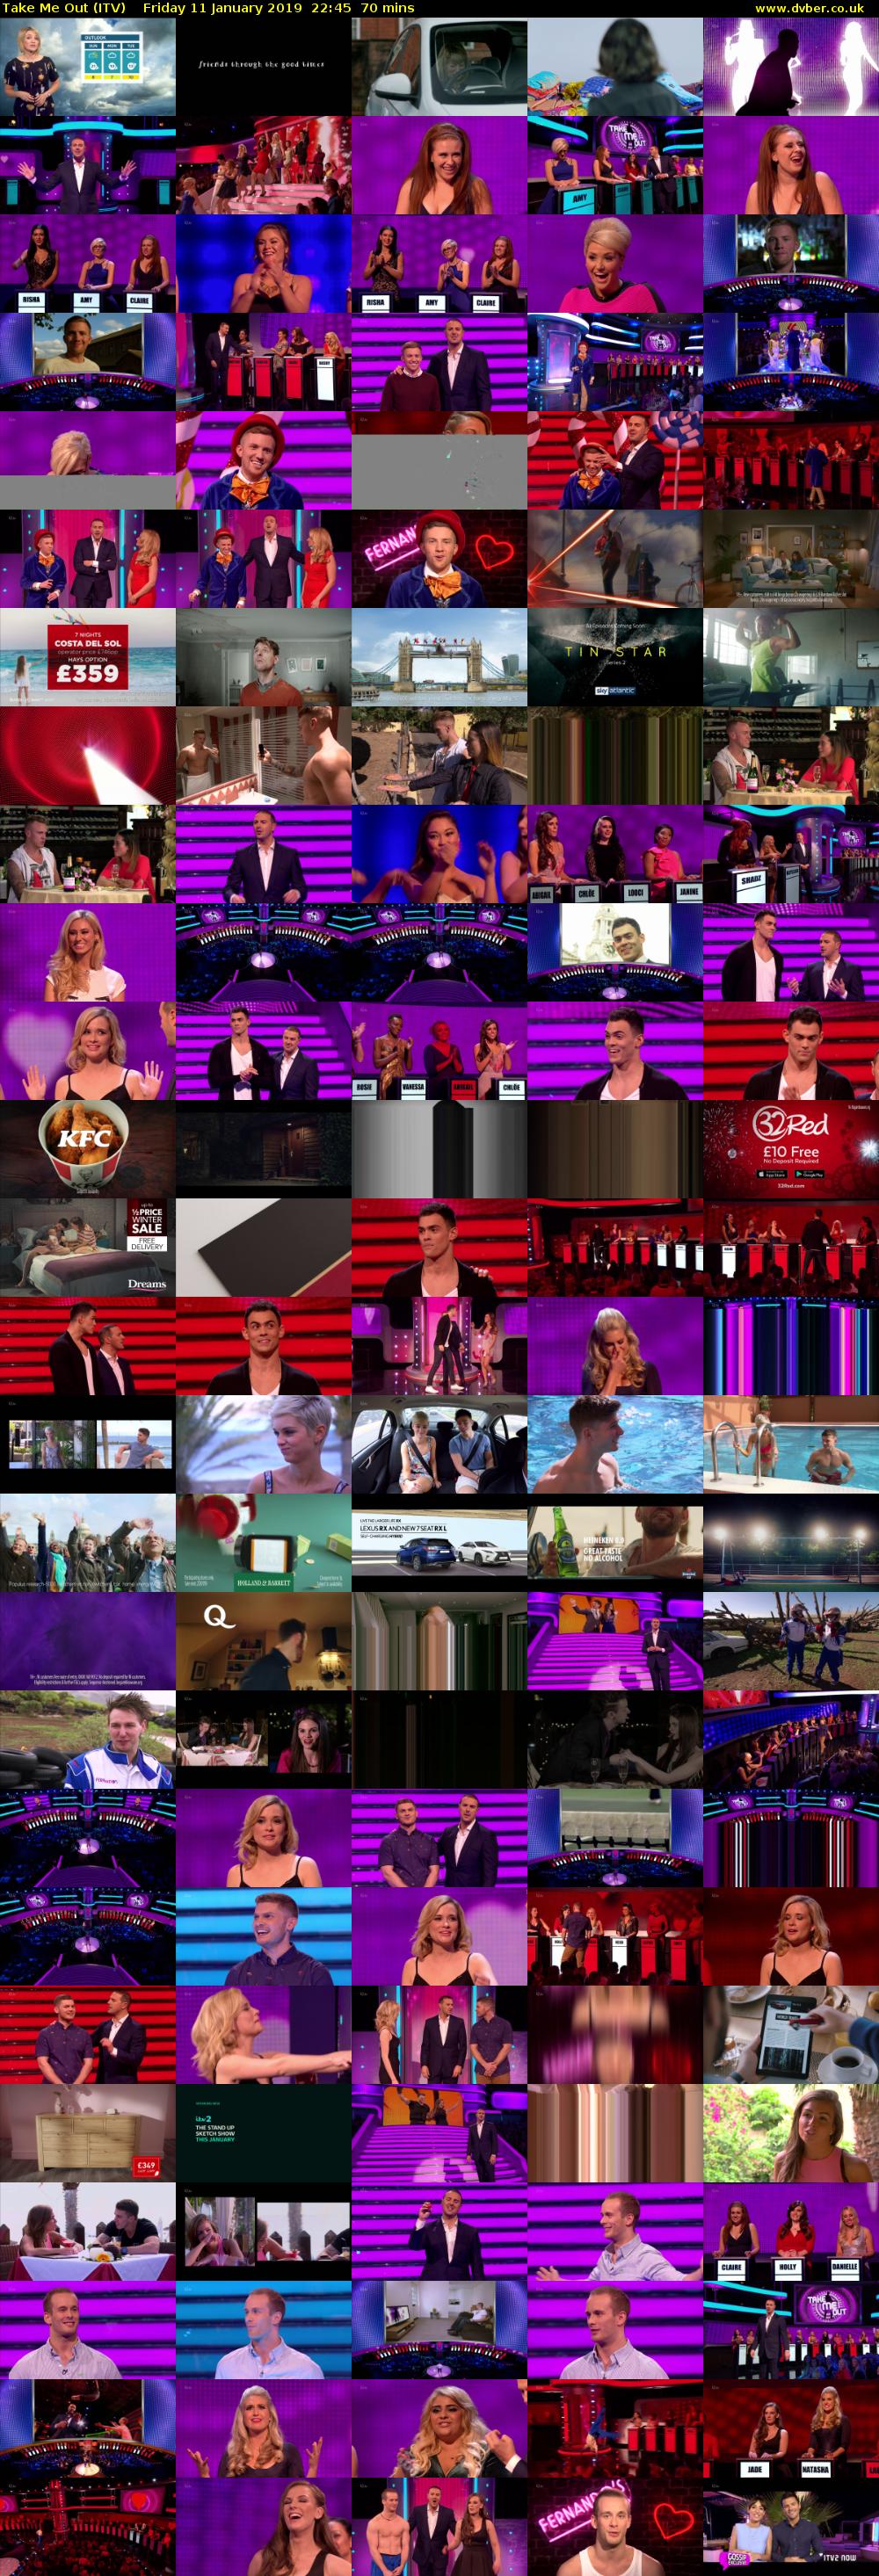 Take Me Out (ITV) Friday 11 January 2019 22:45 - 23:55